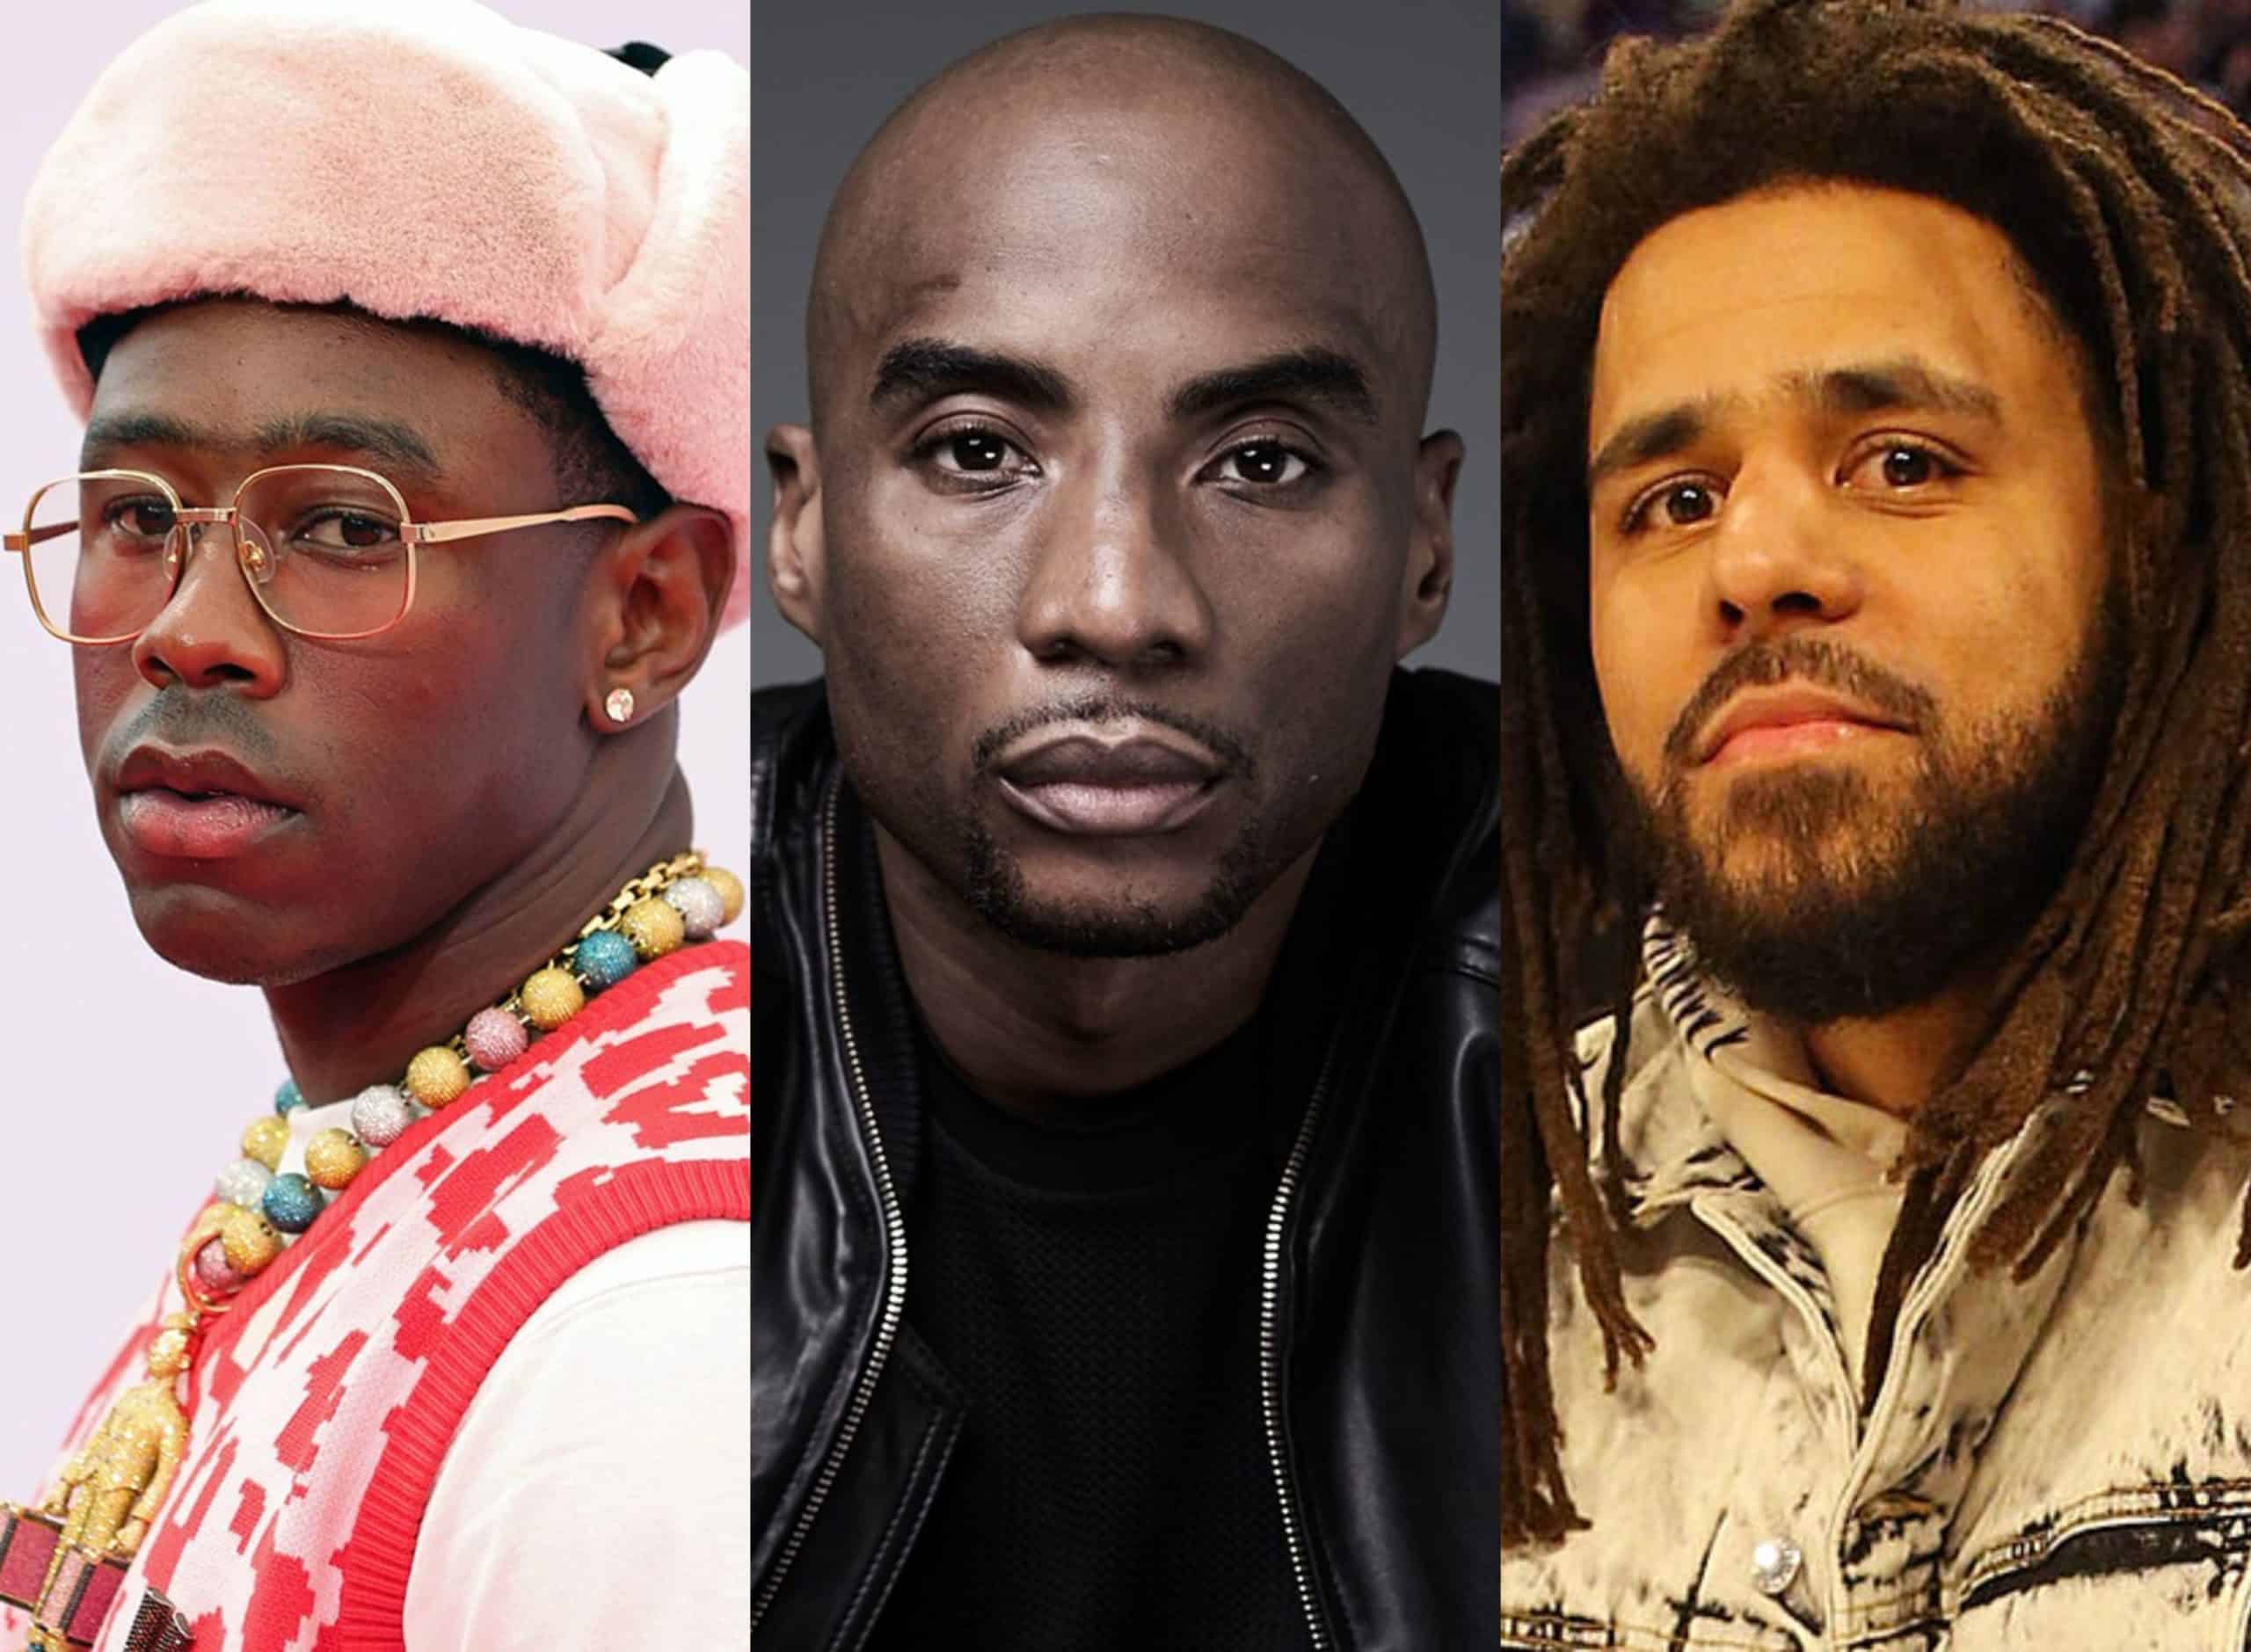 Charlamagne Tha God Calls J. Cole & Tyler, The Creator's Albums Best of 2021